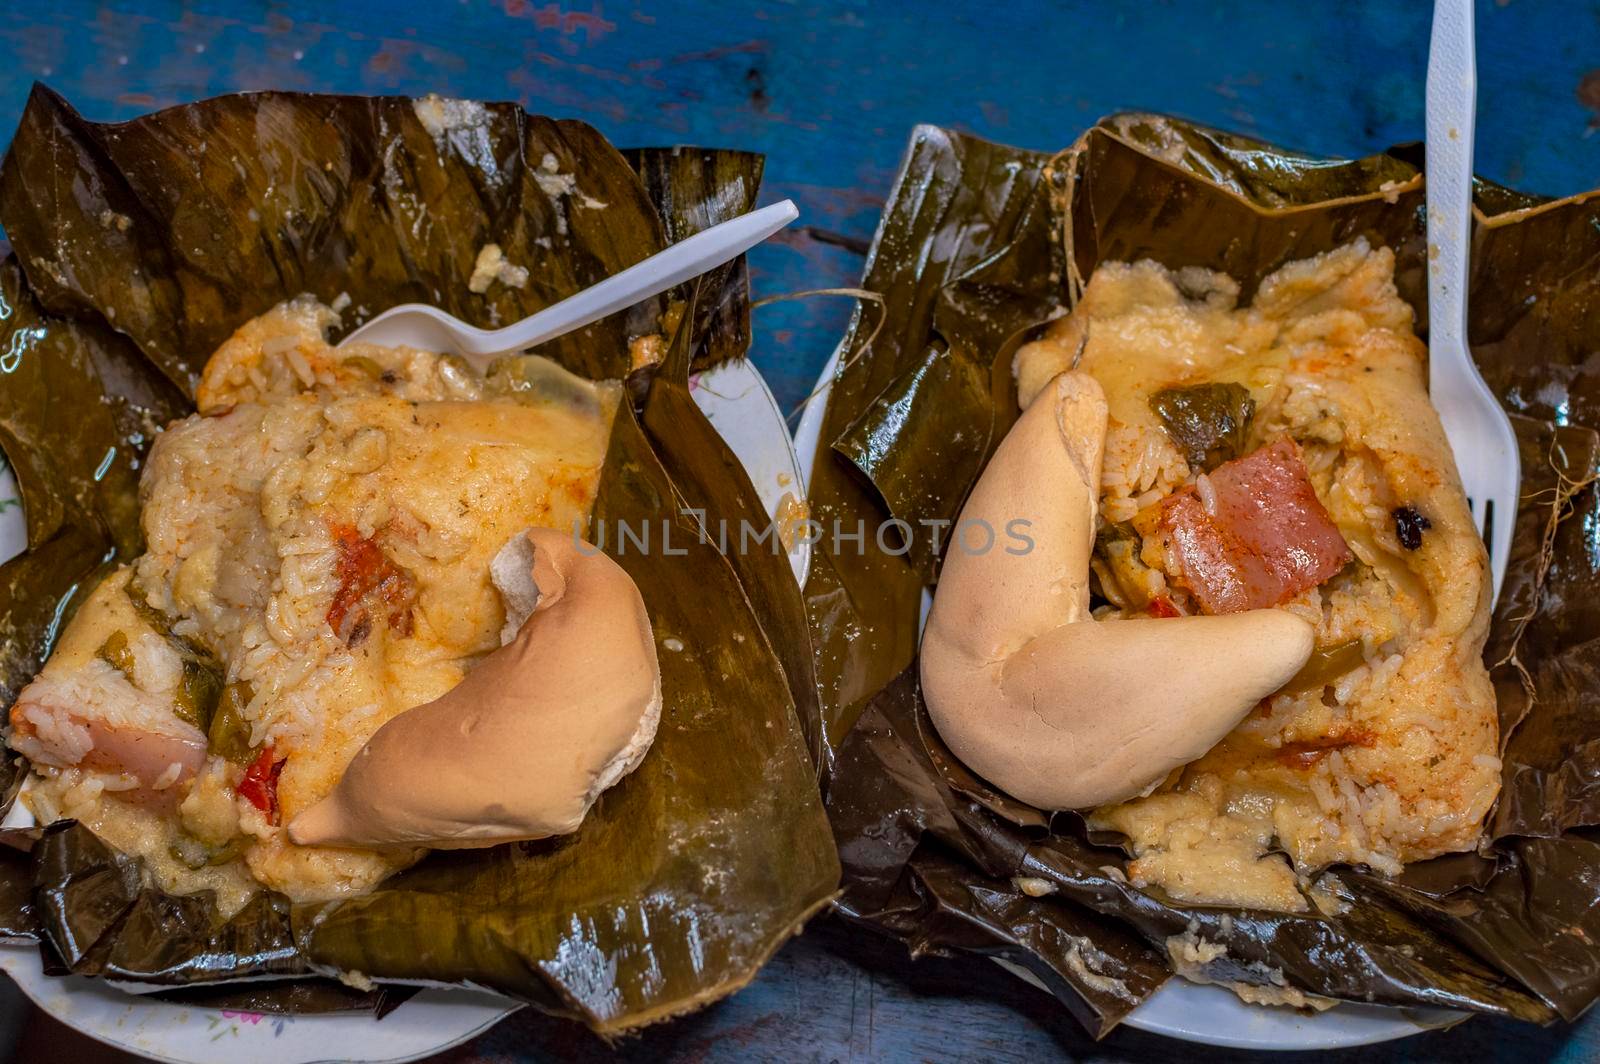 Two Nacatamales served in a banana leaf on the table. Top view of two traditional Nacatamales served on banana leaf, Two Nacatamales with bread served on the table, Venezuelan Hallaca served